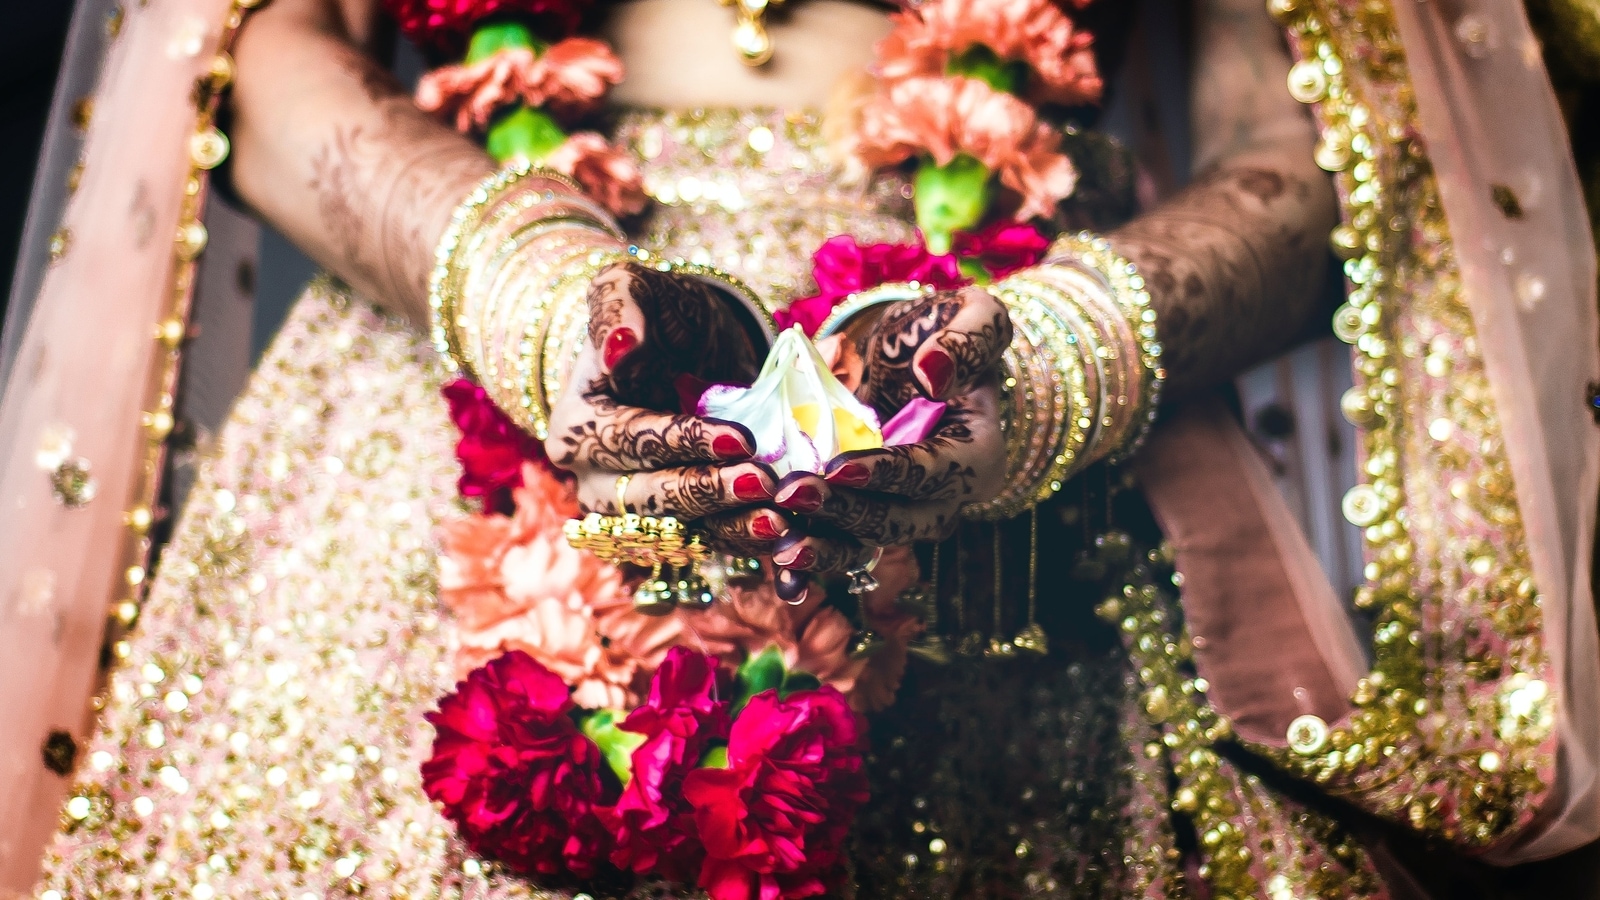 Eight years on, Gujarat woman finds it was a same-sex wedding, files complaint Latest News India hq pic